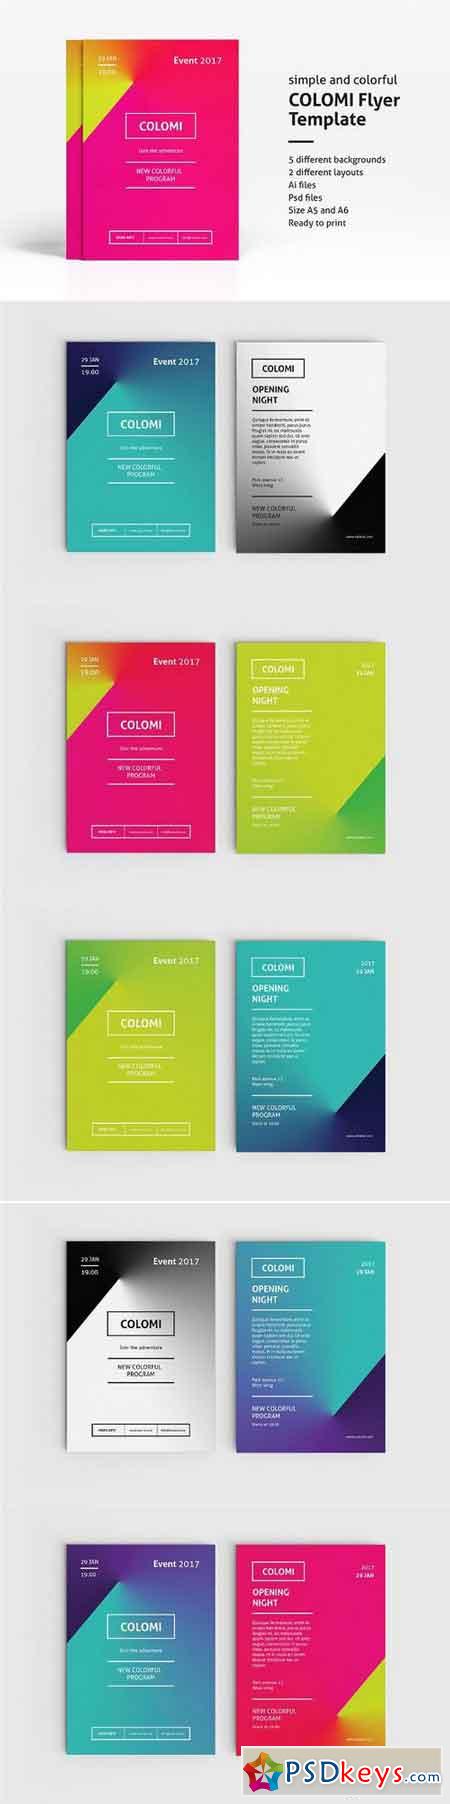 Colomi - Flyer Template 1185049